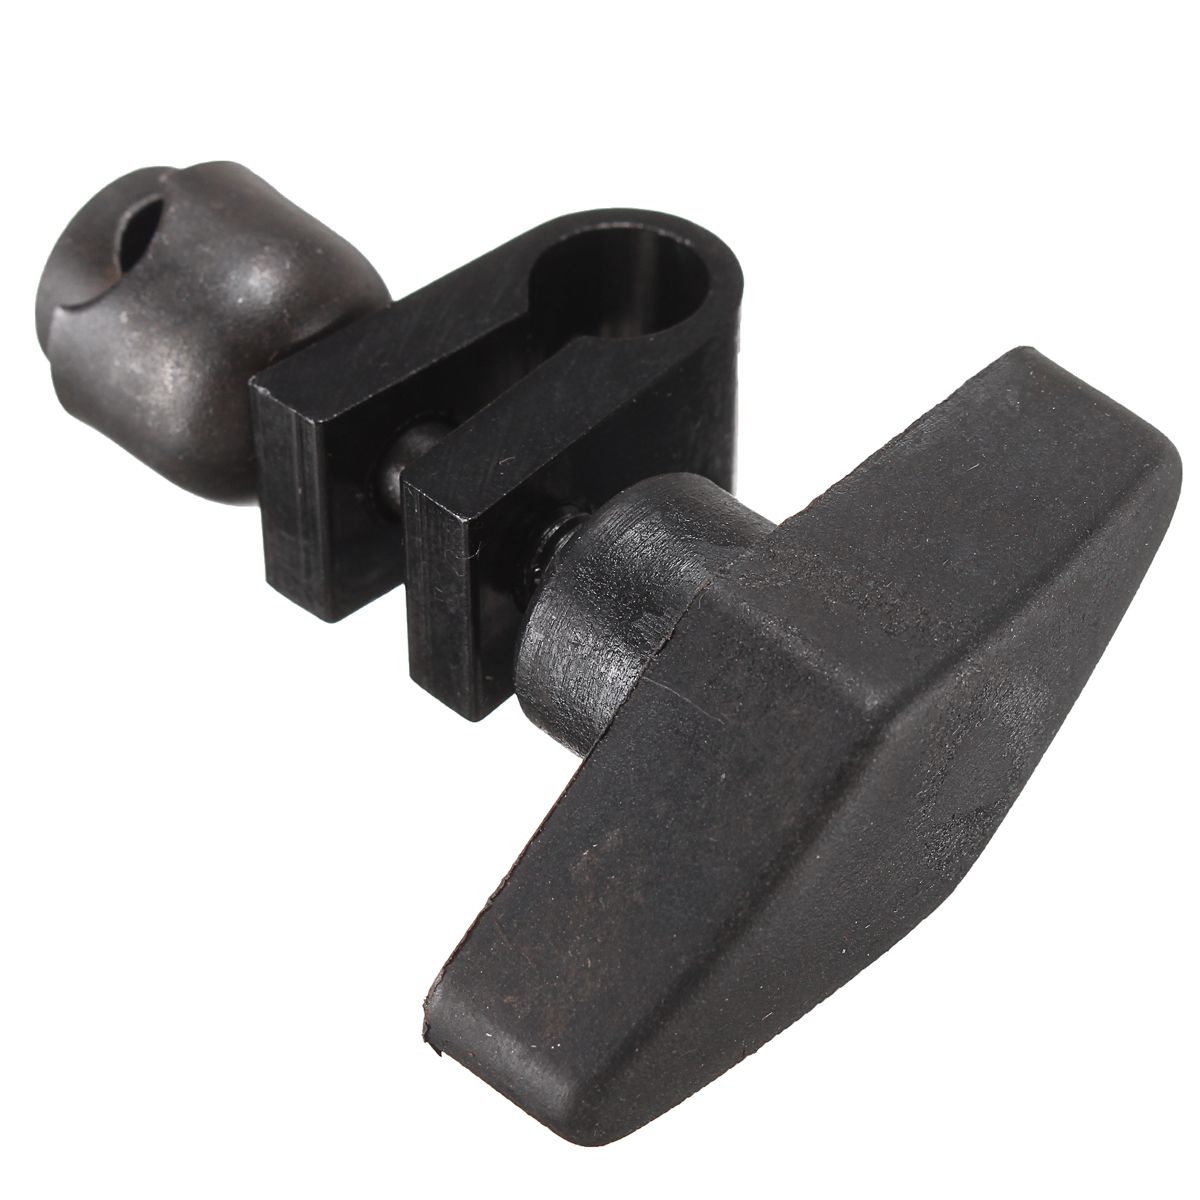 Holder-Clamp-Retainer-Clip-Magnetic-Stands-Dial-Indicatior-Guage-Chuck-8-10mm-1162836